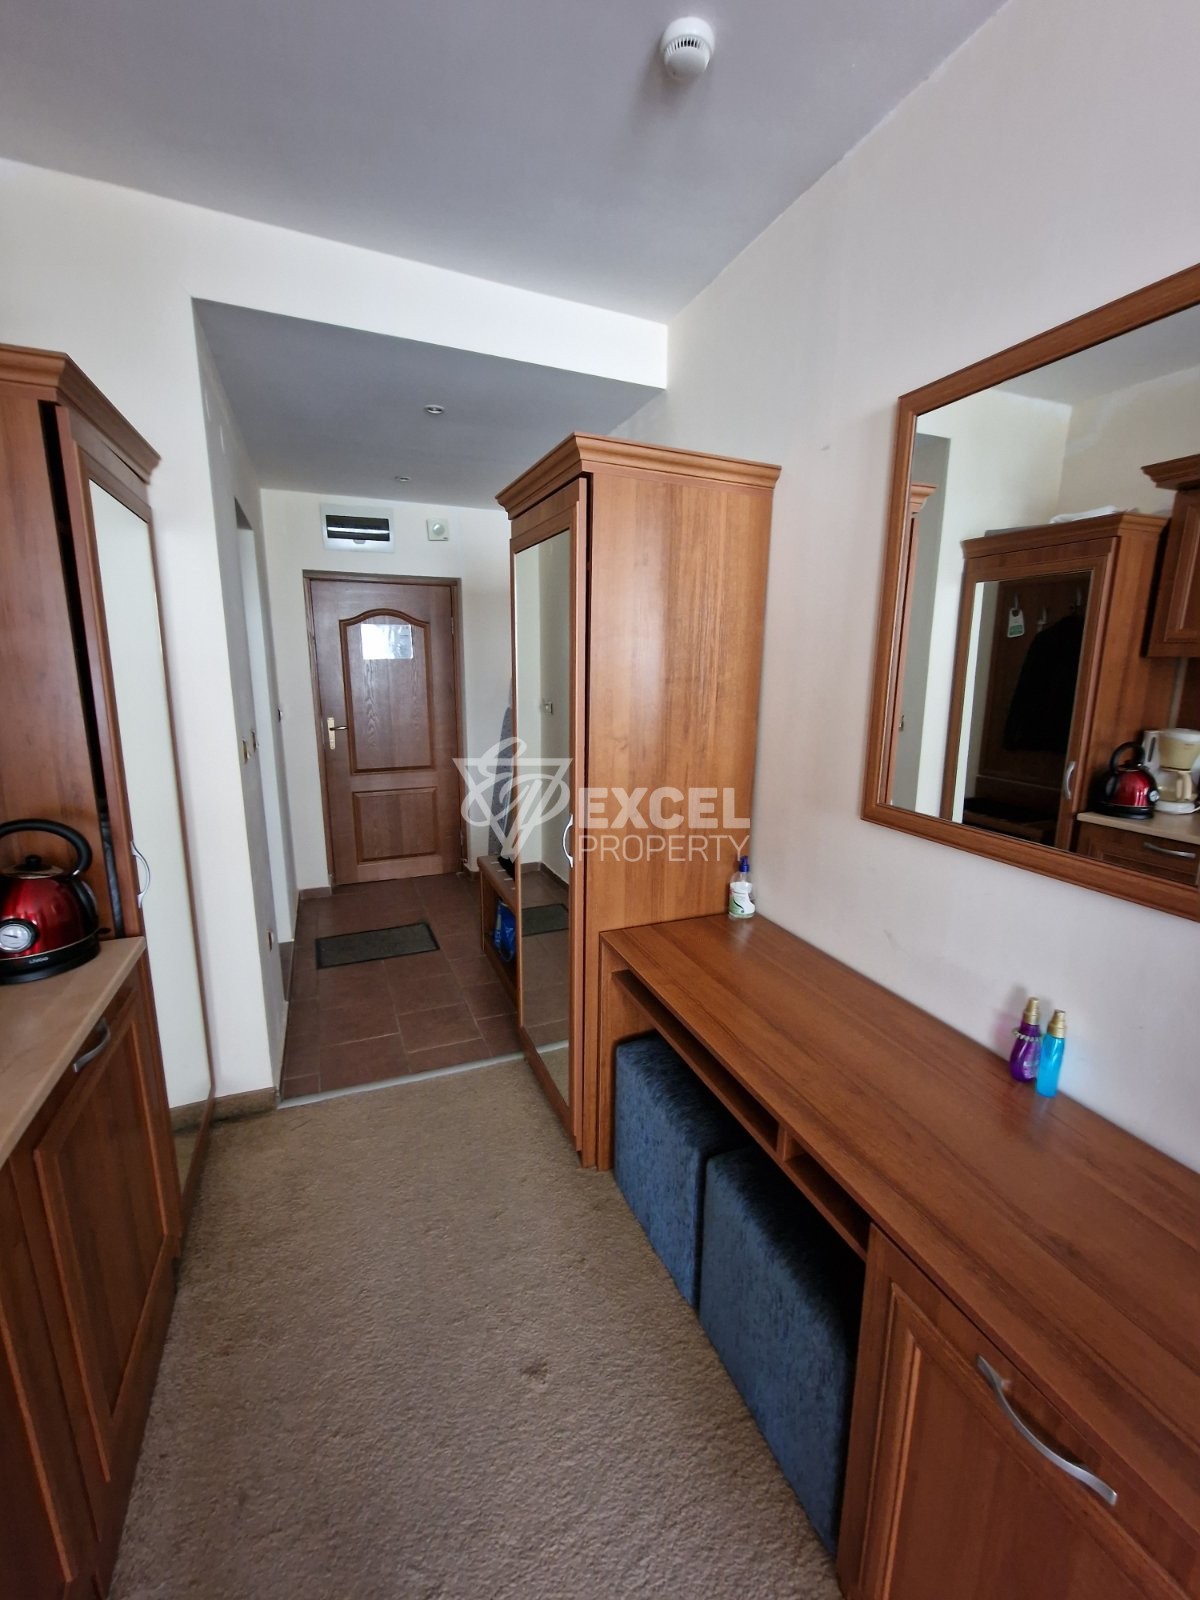 For rent: Furnished studio with air conditioning and terrace in Bansko, next to Kempinski